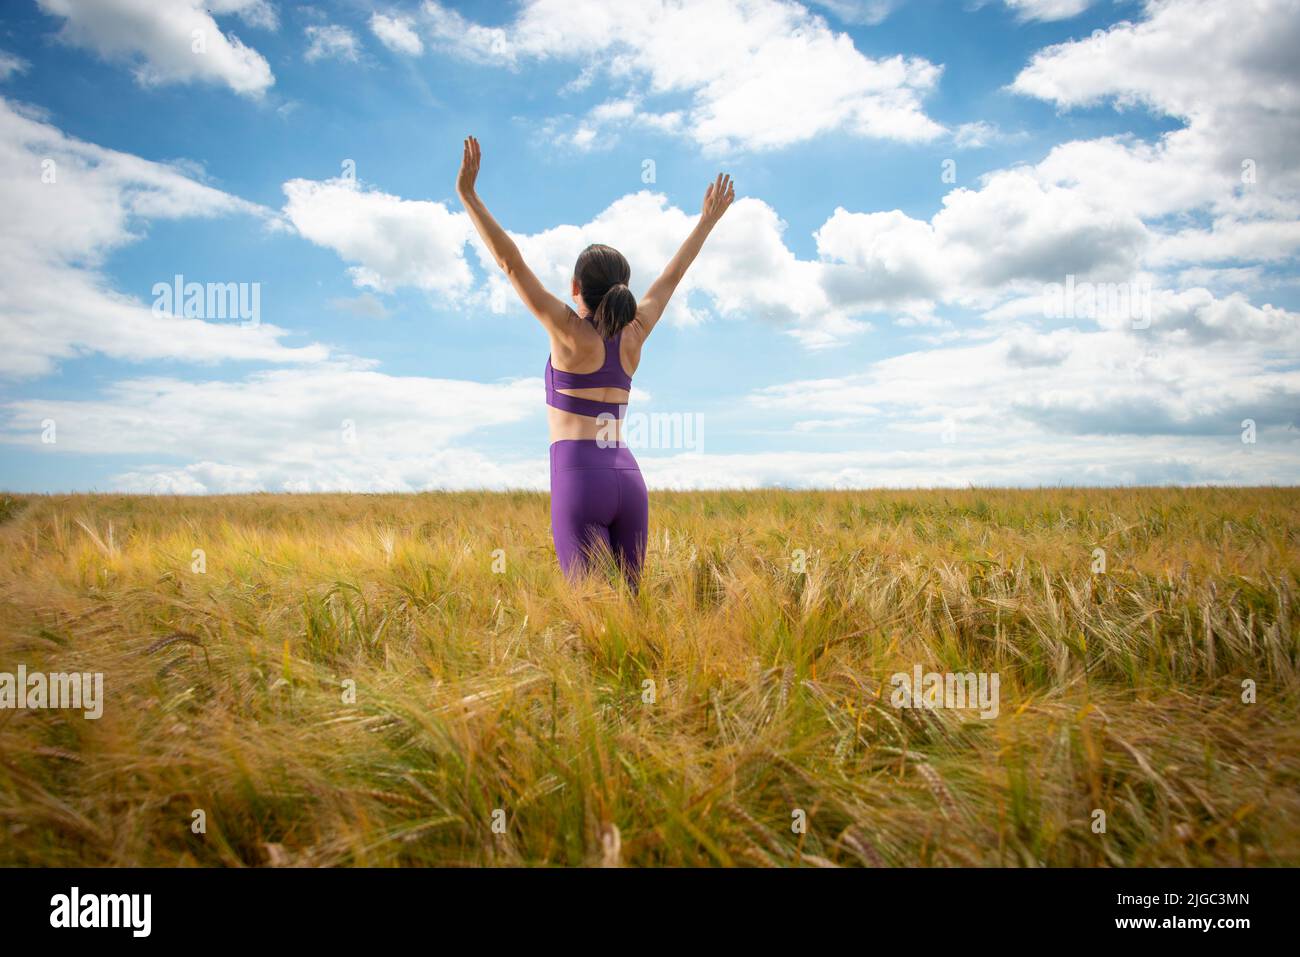 Woman with her arms raised in the middle of a field enjoying the summer and nature Stock Photo